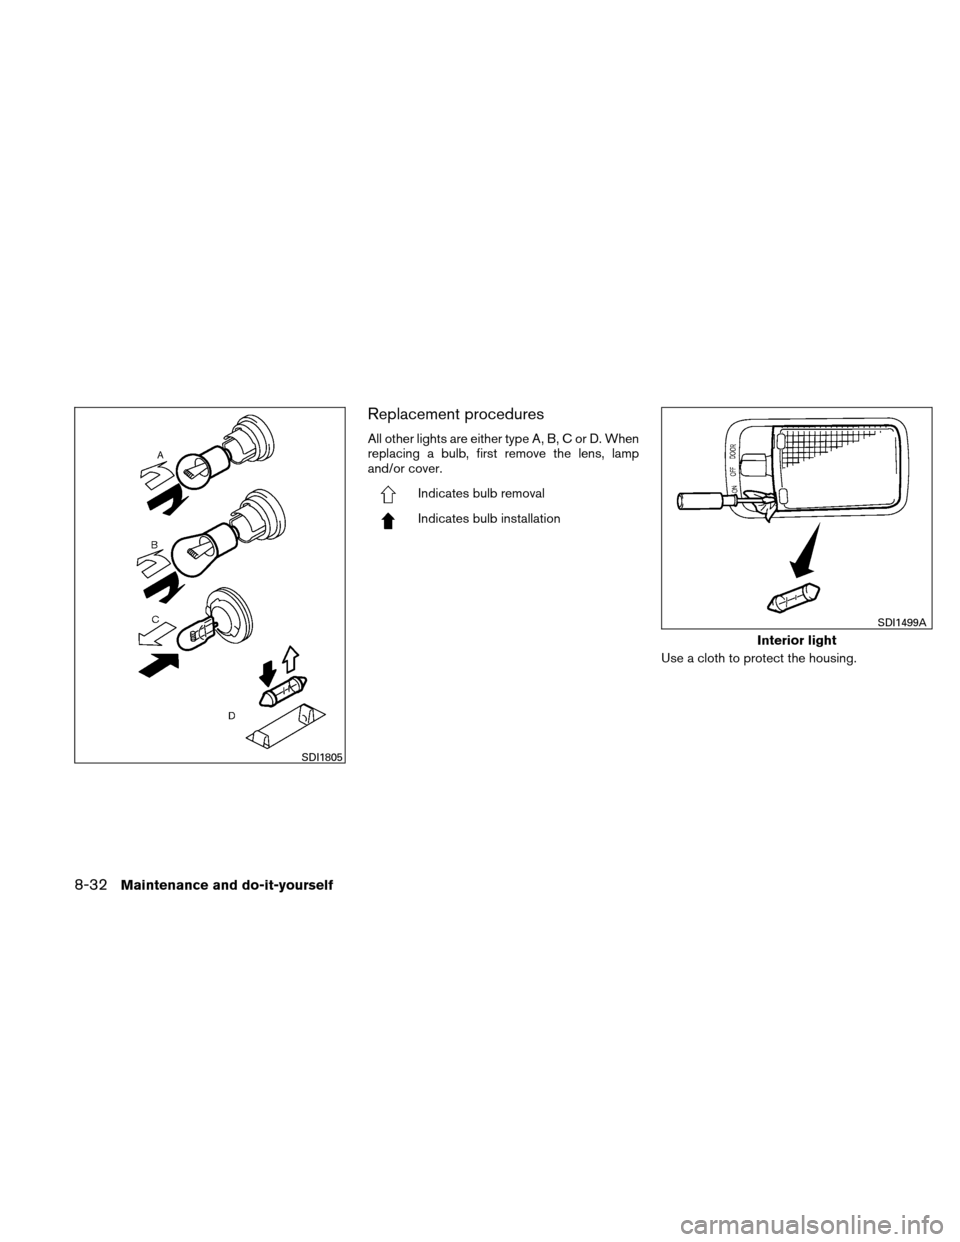 NISSAN VERSA HATCHBACK 2010 1.G Service Manual Replacement procedures
All other lights are either type A, B, C or D. When
replacing a bulb, first remove the lens, lamp
and/or cover.
Indicates bulb removal
Indicates bulb installationUse a cloth to 